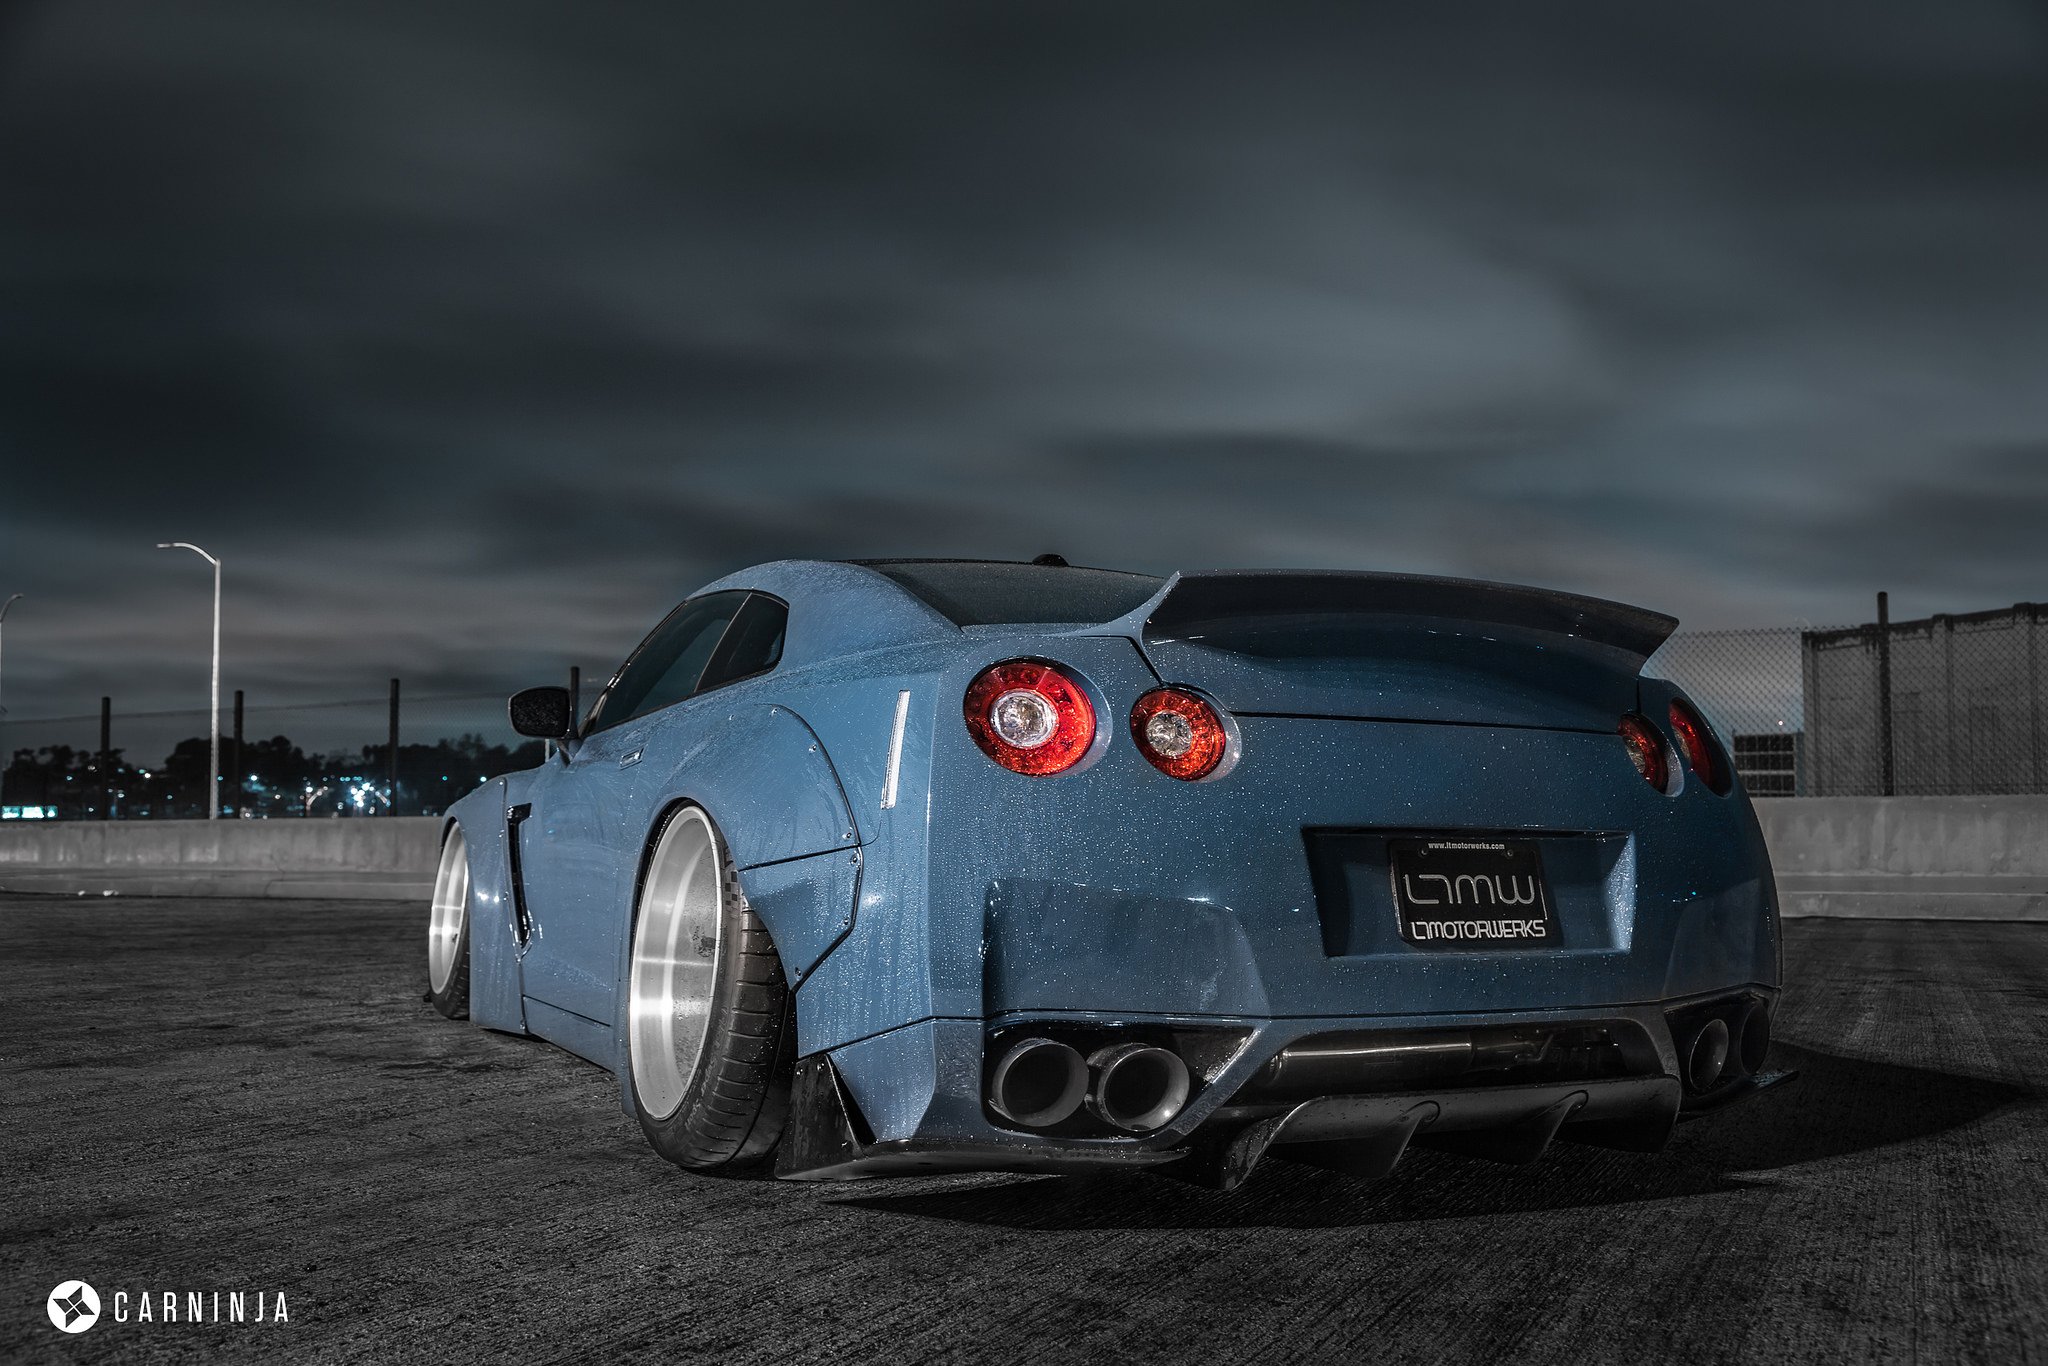 Nissan Gt R Body Kit Wallpapers